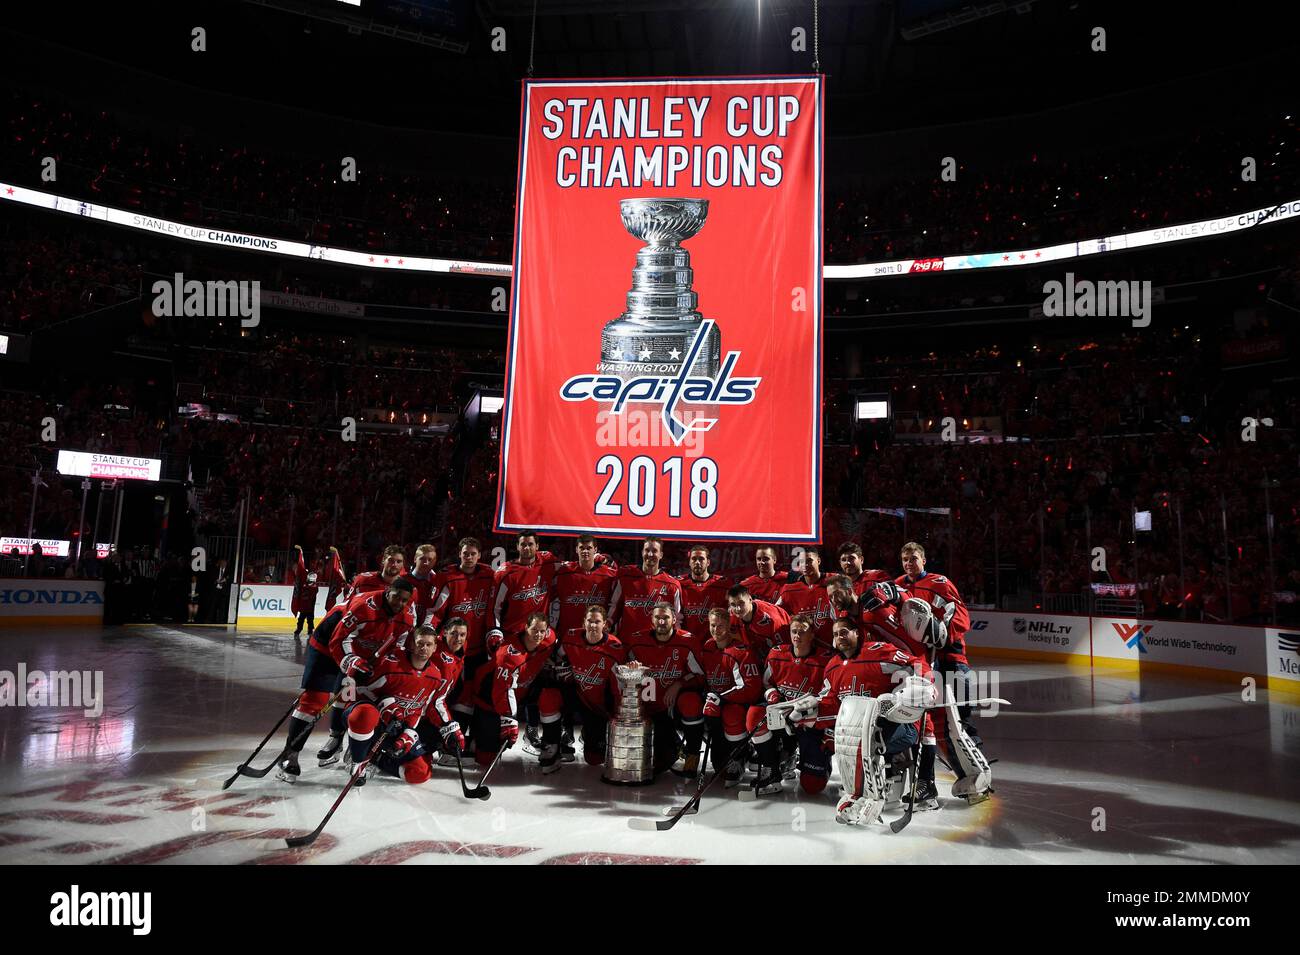 https://c8.alamy.com/comp/2MMDM0Y/the-washington-capitals-pose-under-the-stanley-cup-champions-banner-before-the-teams-nhl-hockey-game-against-the-boston-bruins-wednesday-oct-3-2018-in-washington-ap-photonick-wass-2MMDM0Y.jpg